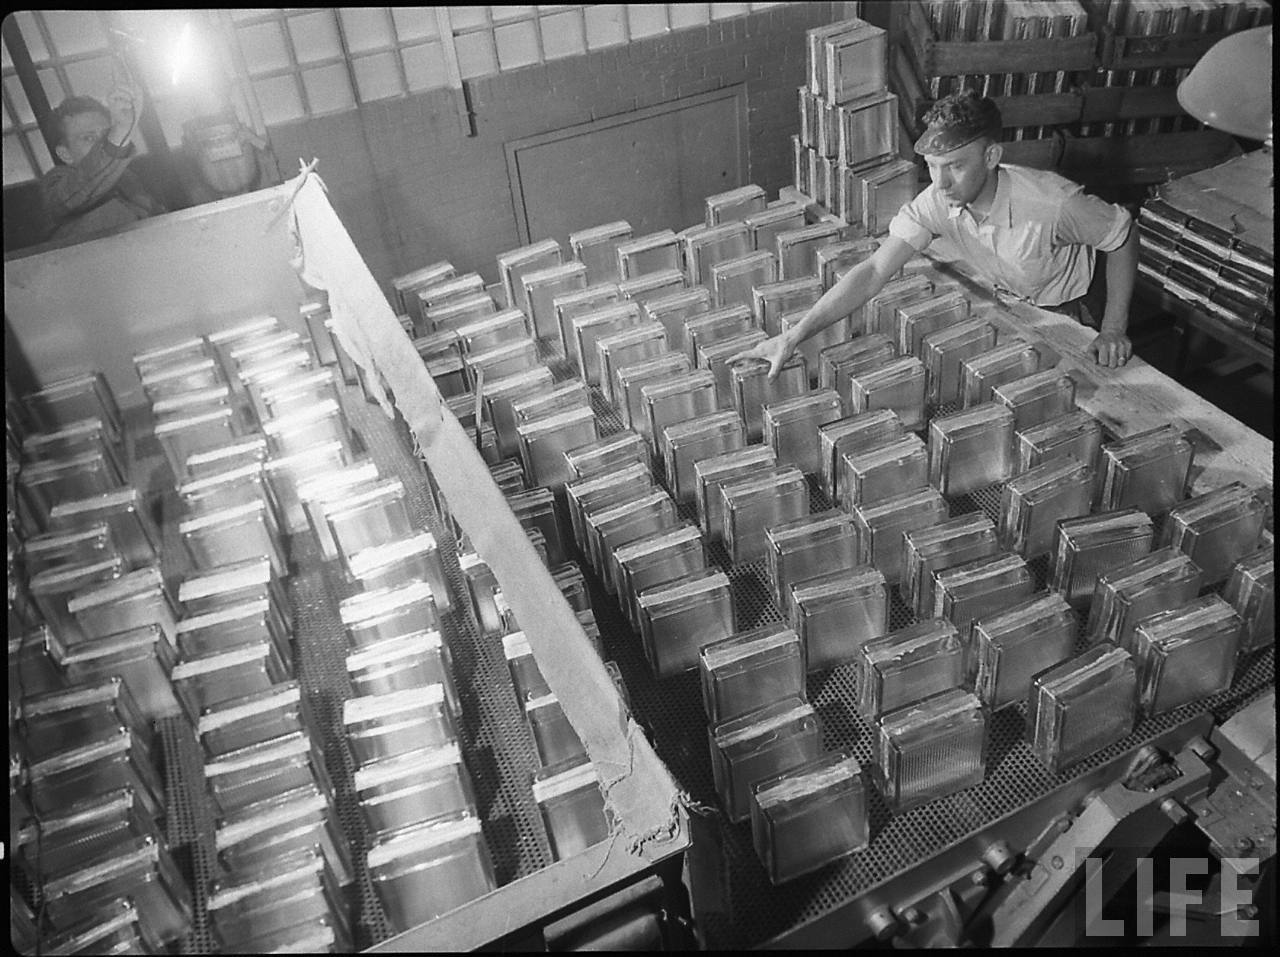 Glass Blocks being made at Muncie, IN Plant